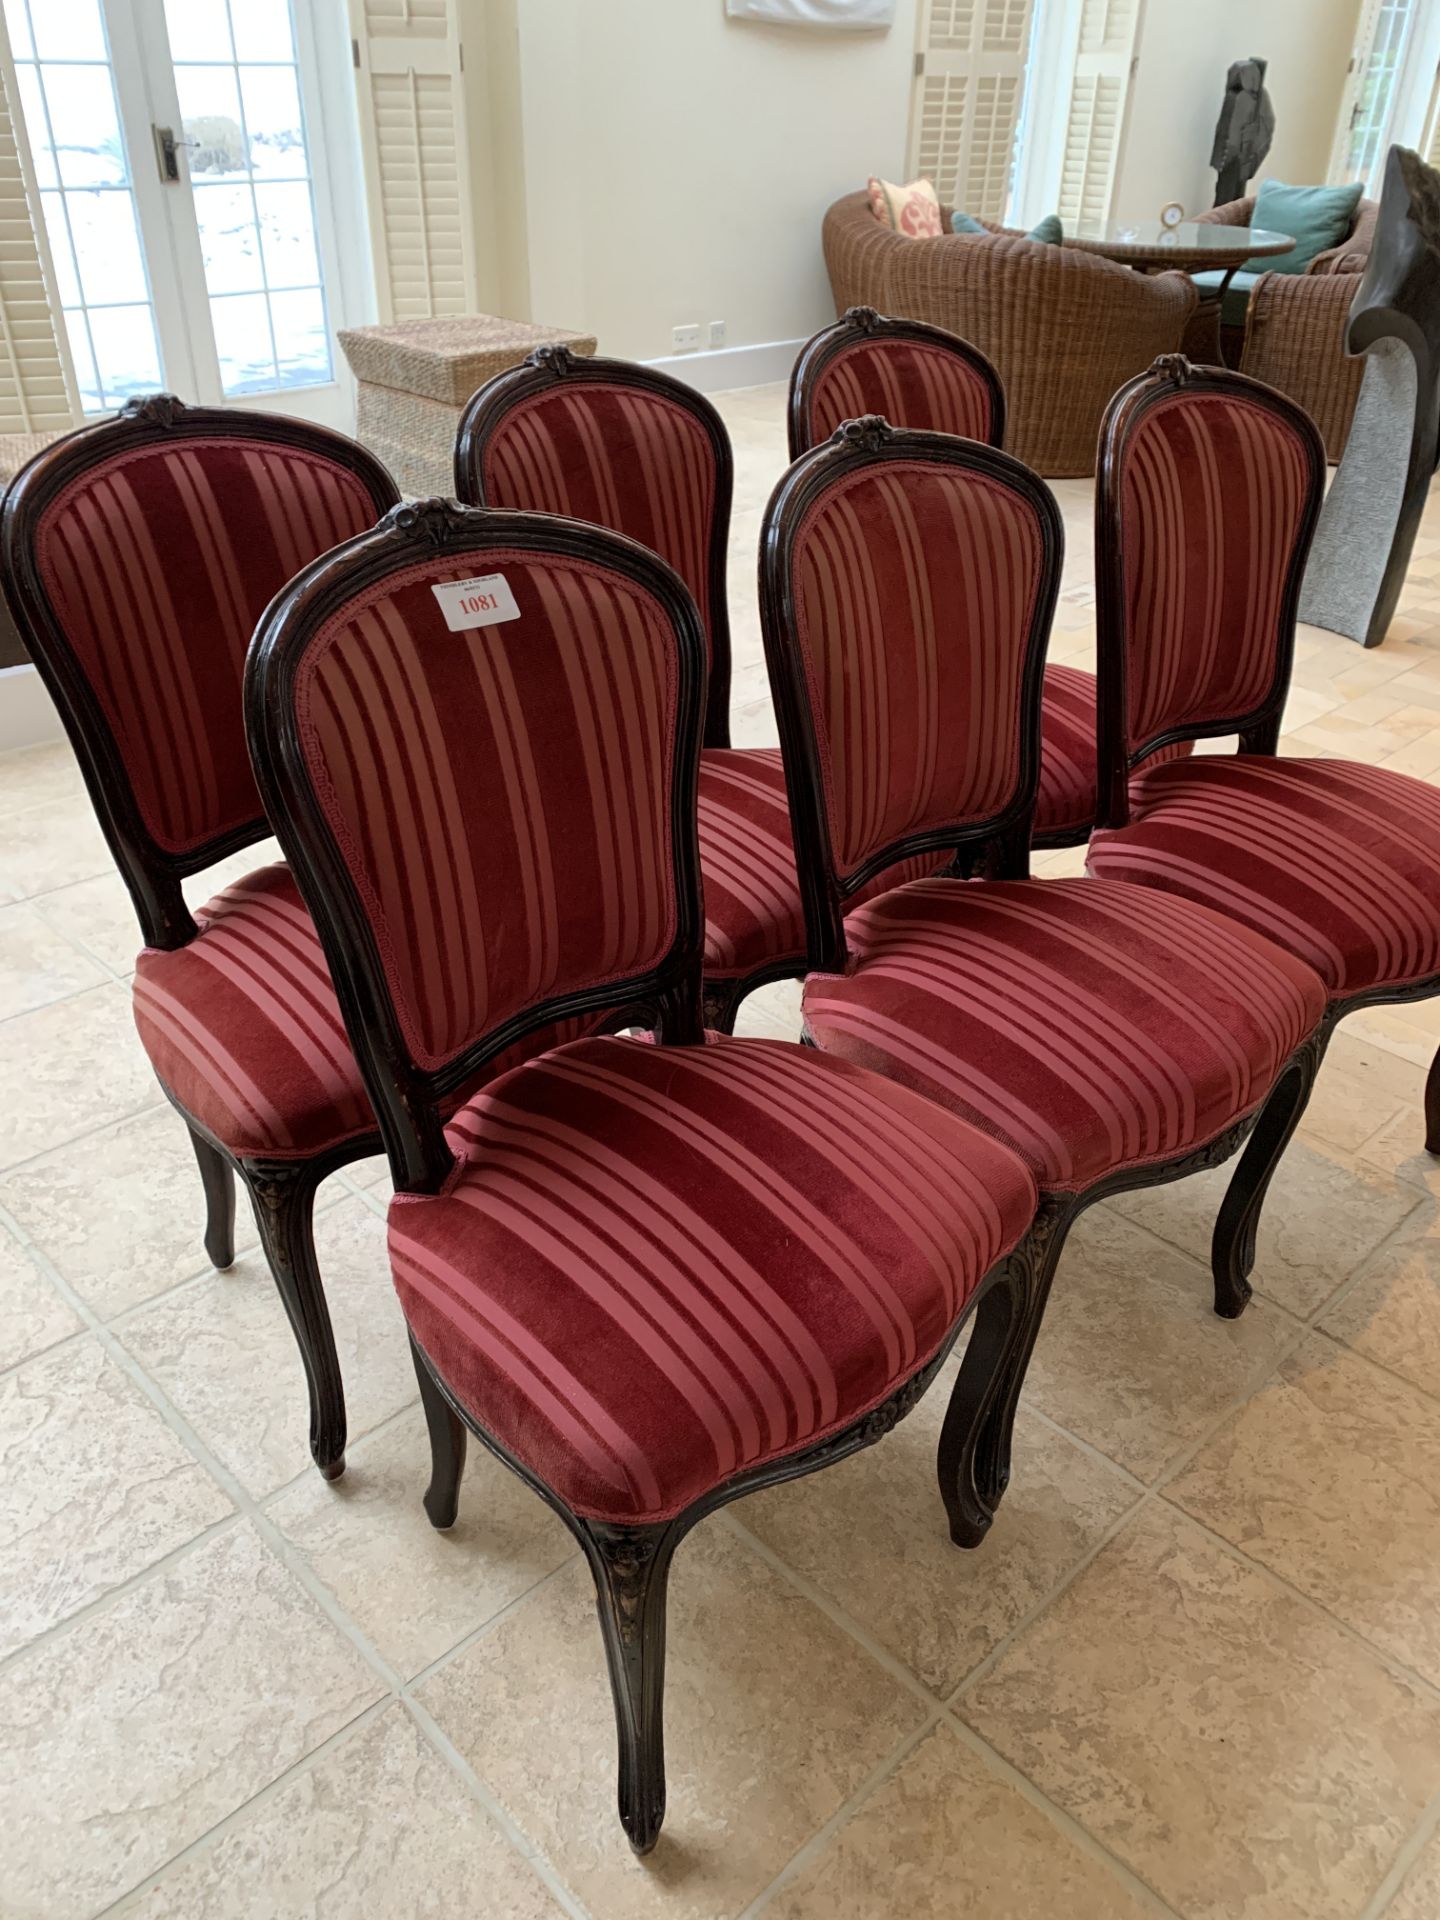 Six French style dining chairs in pink striped upholstery - Image 2 of 3